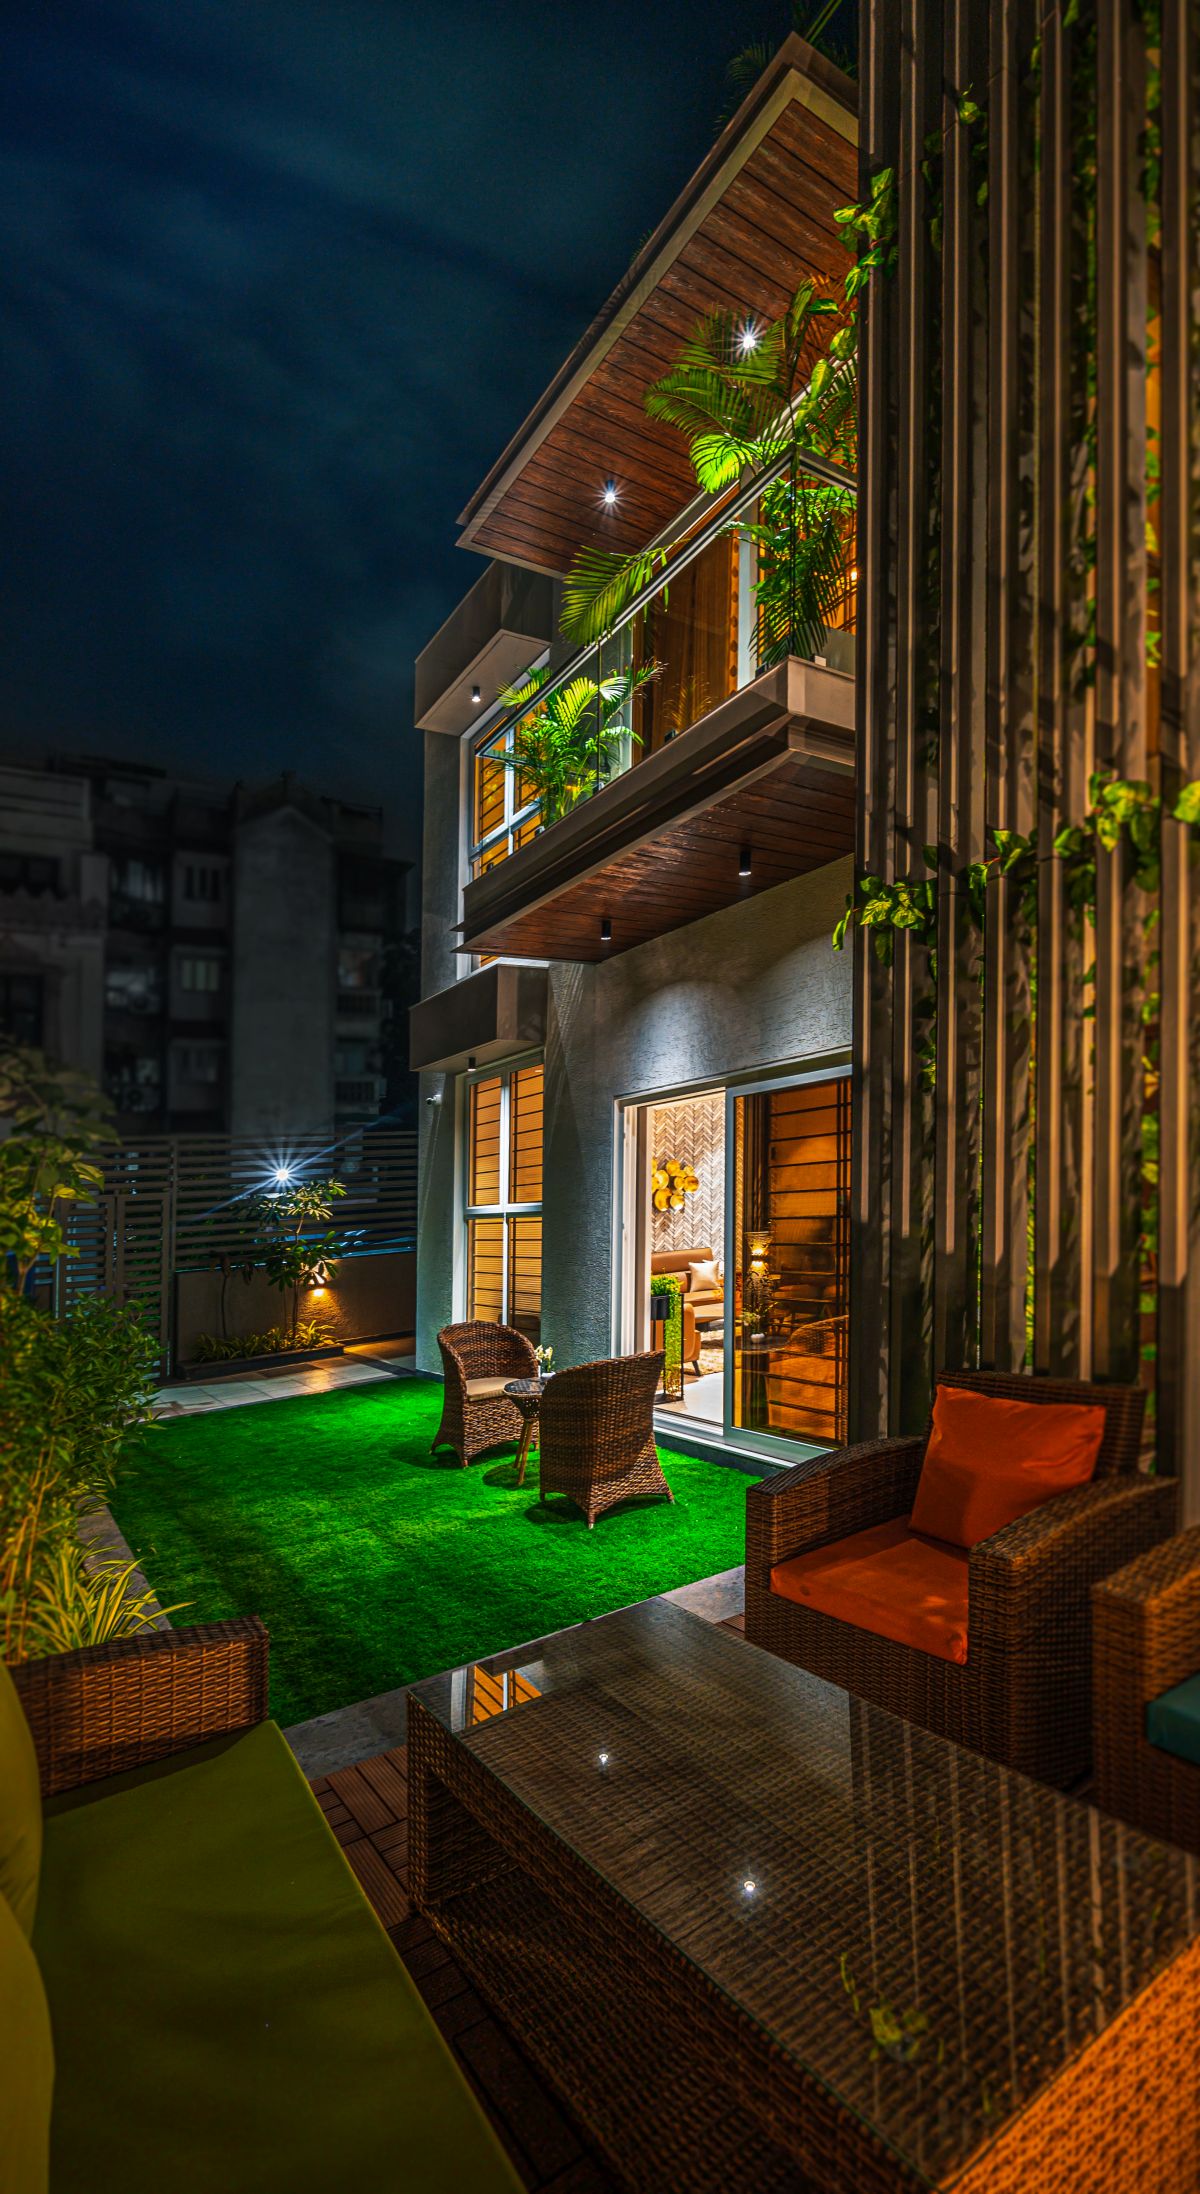 URBAN FRAME HOUSE, at AHMEDABAD, by Shayona Consultant 25